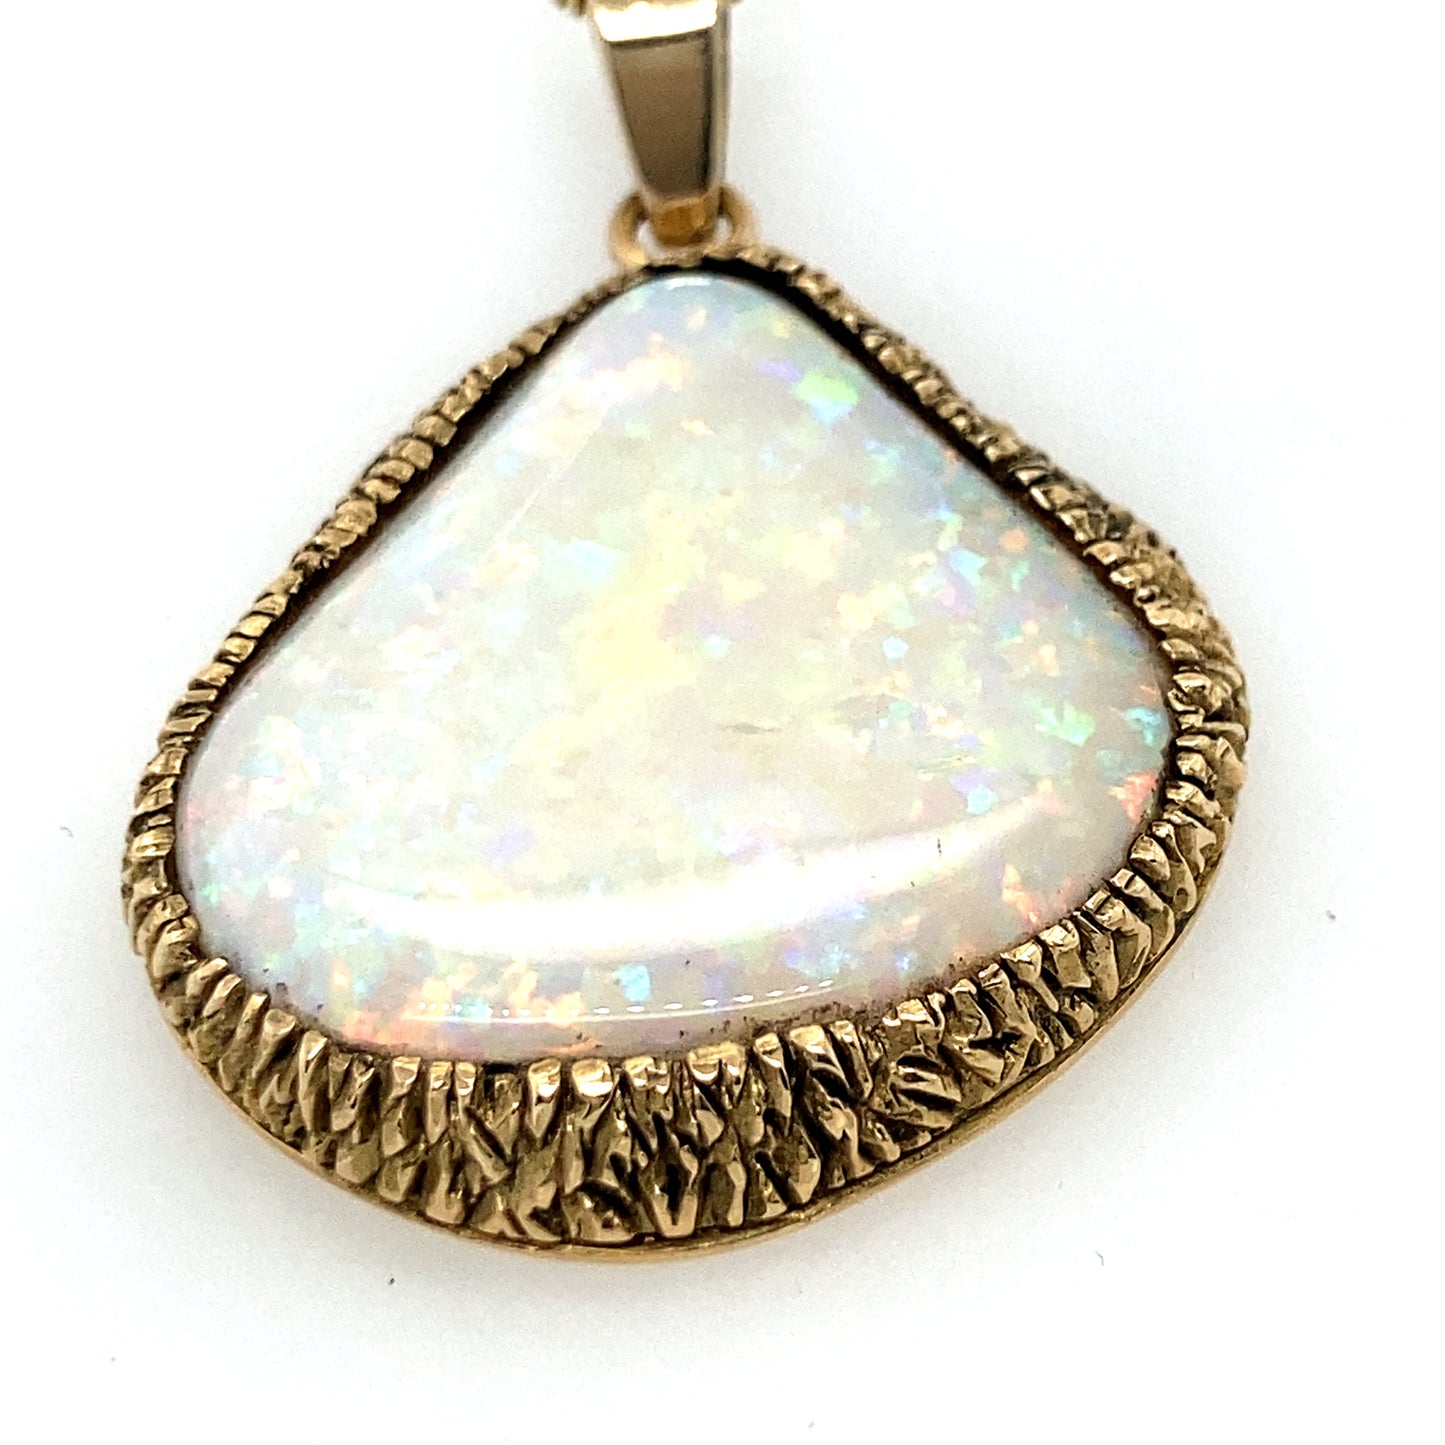 14 k white gold pendant with a huge fire opal stone. Beautiful vintage art deco pice.